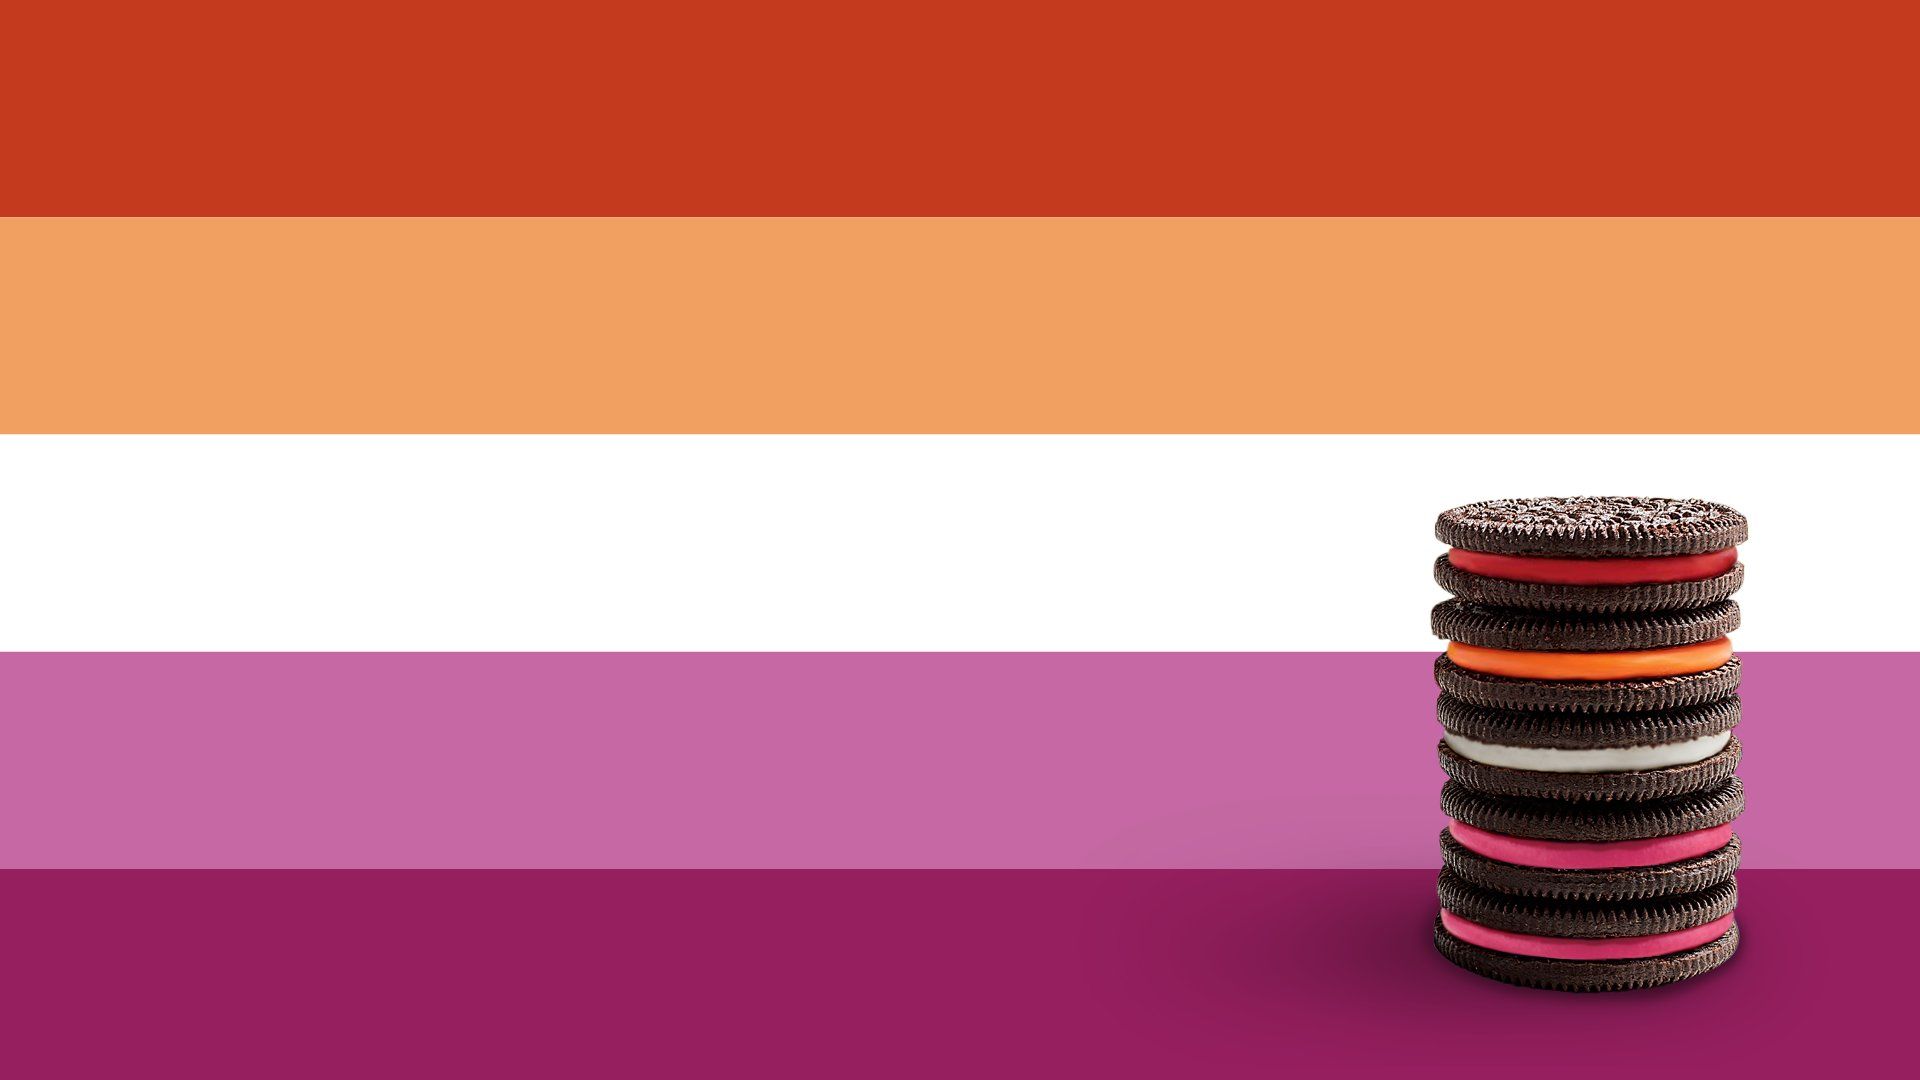 OREO Cookie on Twitter: The Lesbian pride flag consists of five horizontal ...